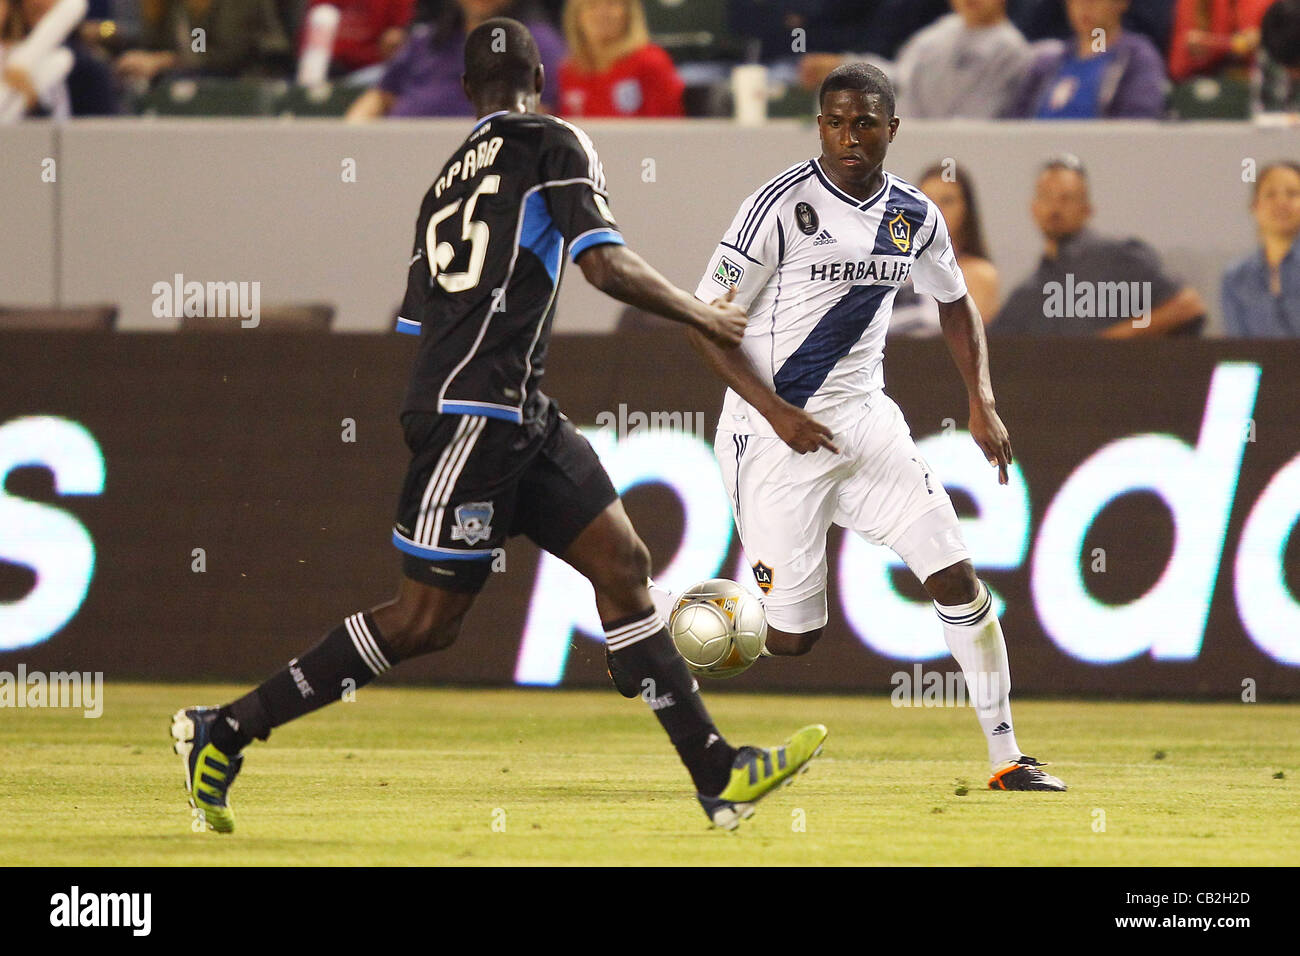 May 23, 2012 - Carson, California, United States of America - Ike Opara (55) of San Jose Earthquakes rushes in to try to steal the ball from Edson Buddle (14) of Los Angeles Galaxy in the second half during the Los Angeles Galaxy vs San Jose Earthquakes game at the Home Depot Center. The Earthquakes Stock Photo